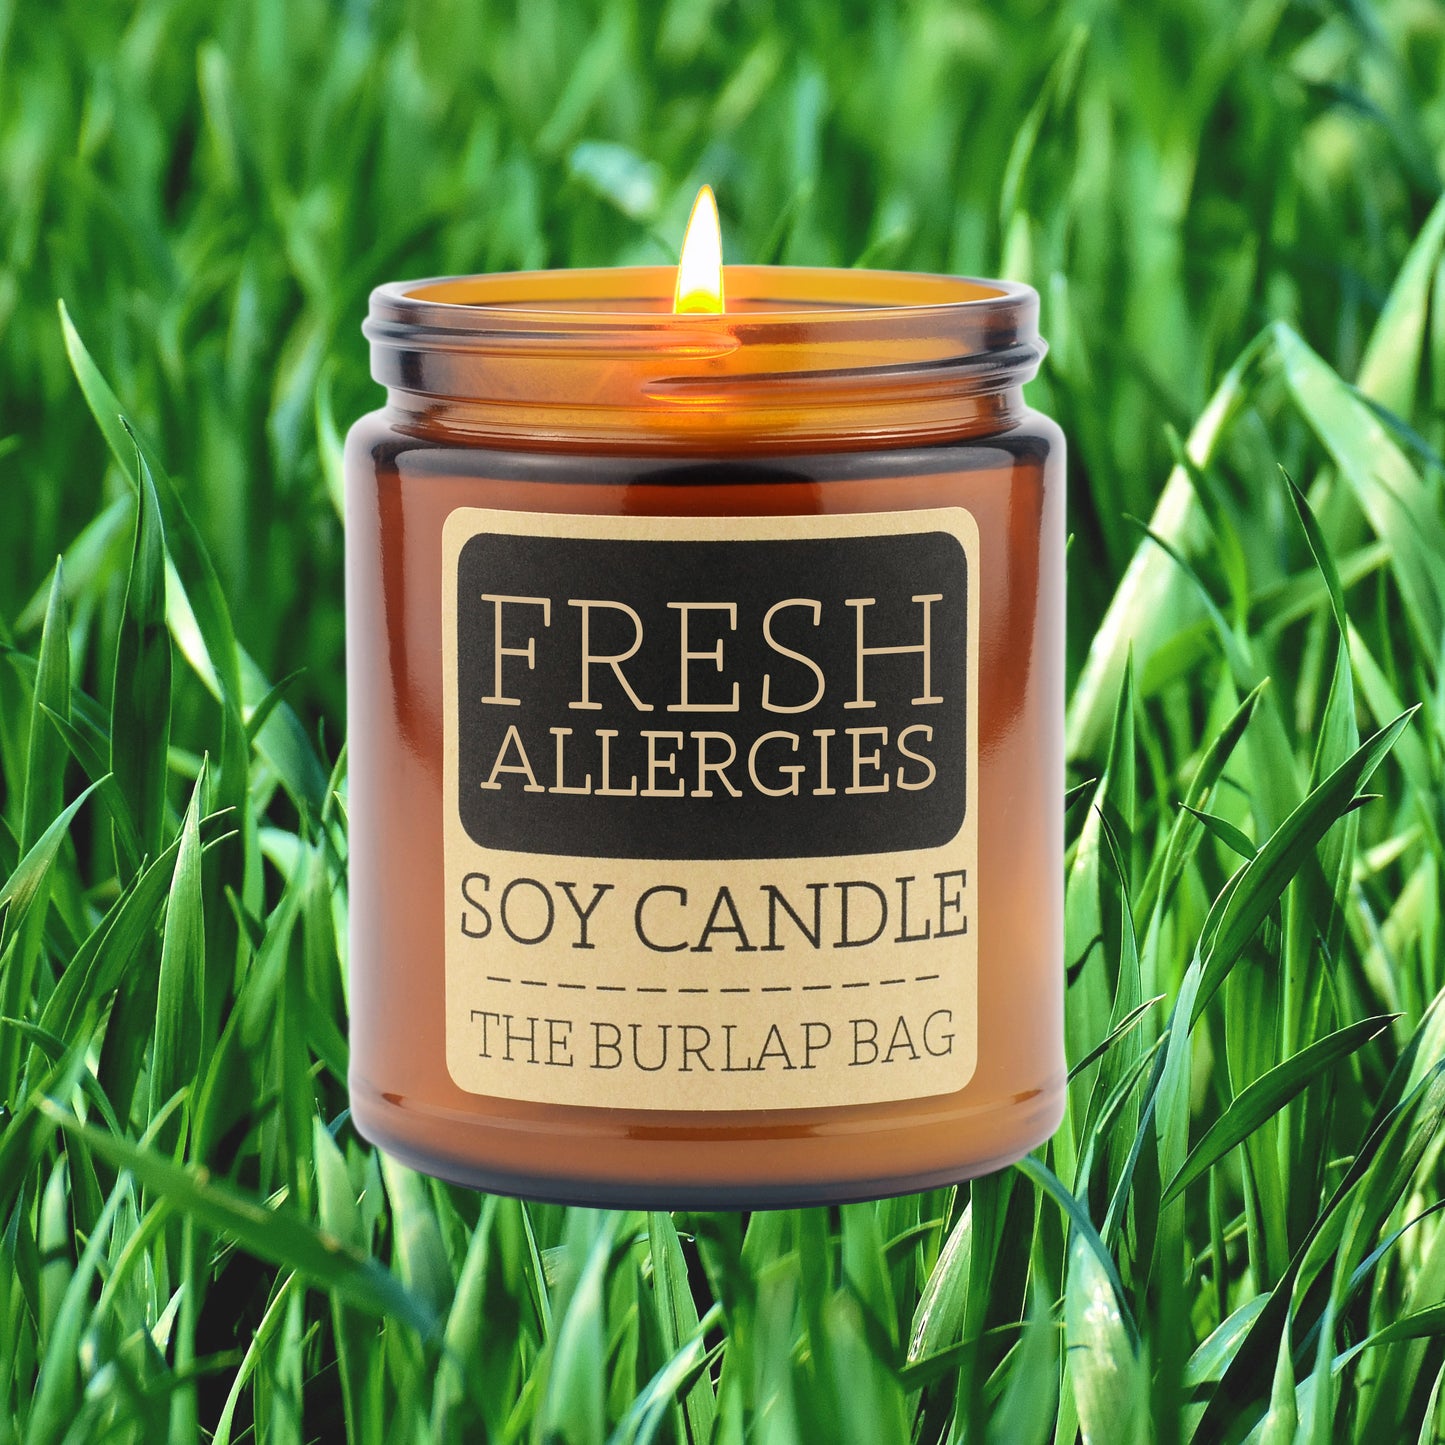 Fresh Allergies - Soy Candle 9oz